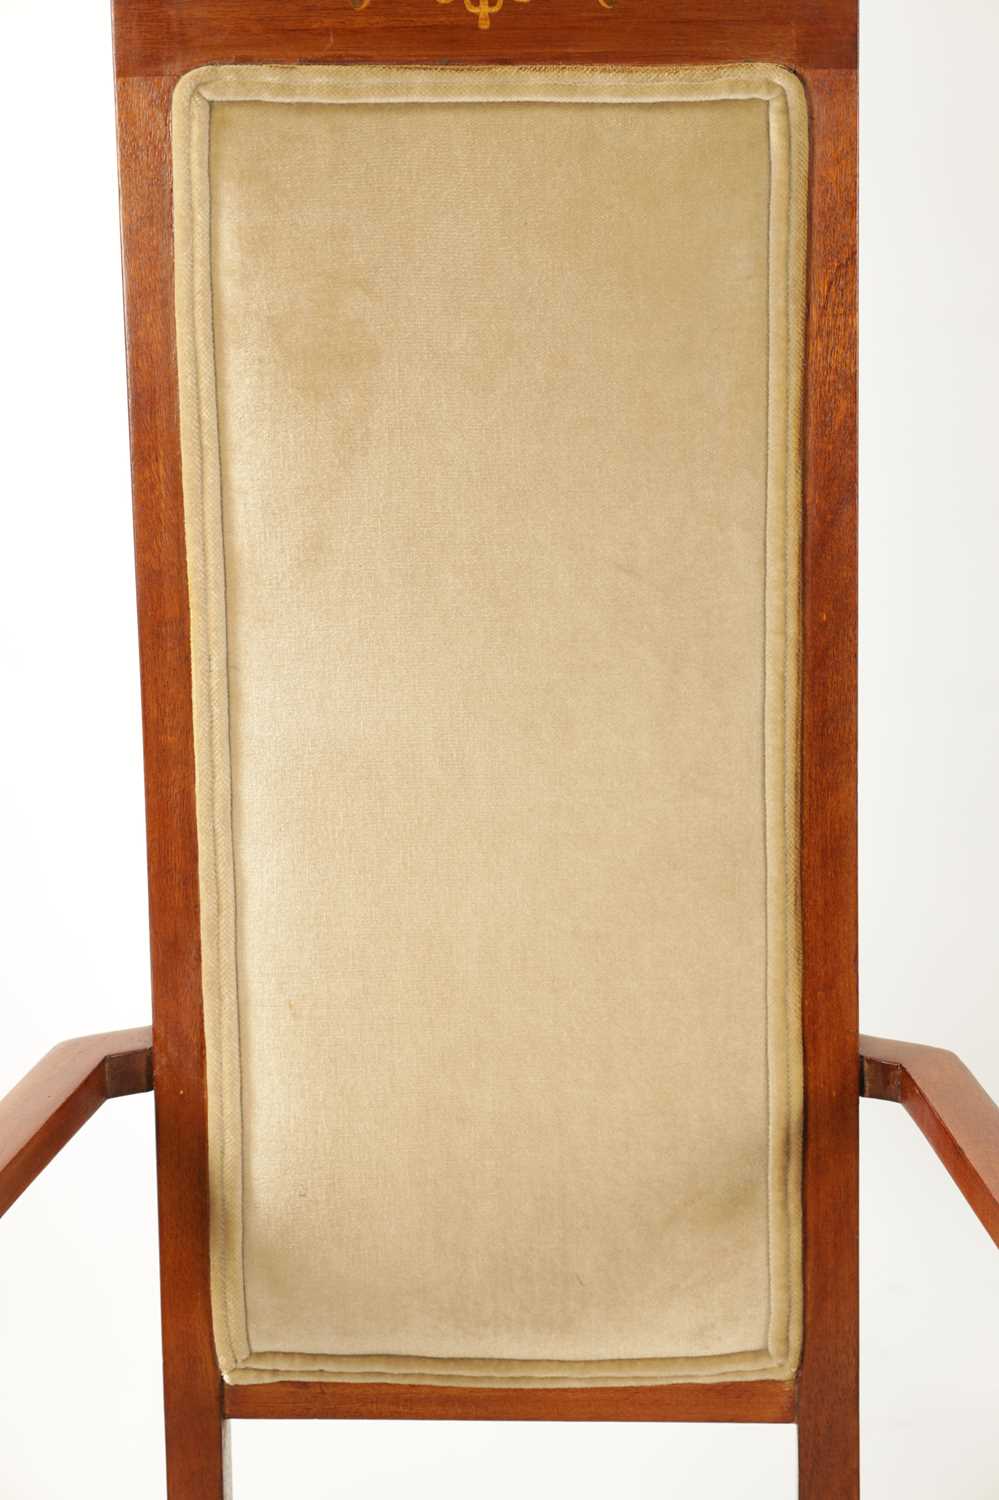 A PAIR OF INLAID MAHOGANY ART NOVEAU LIBERTY-STYLE UPHOLSTERED ARMCHAIRS - Image 7 of 11